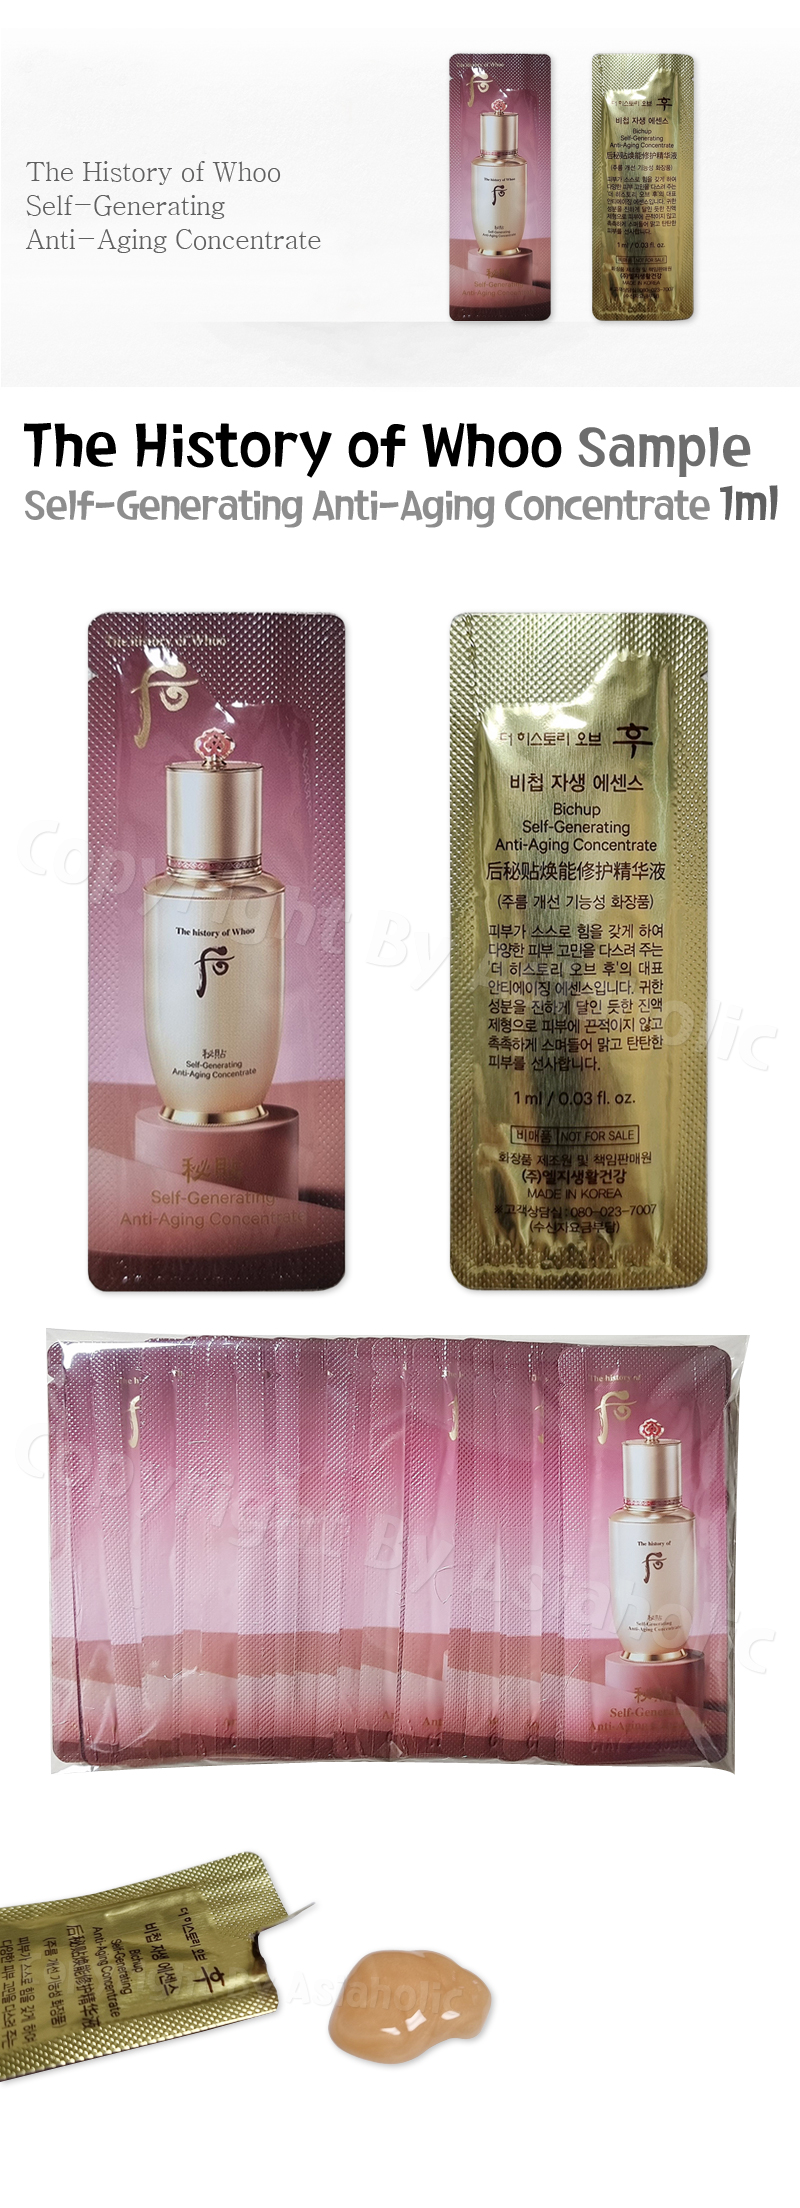 The history of Whoo Self-Generating Anti-Aging Concentrate 1ml x 30pcs (30ml) Sample Newest Version